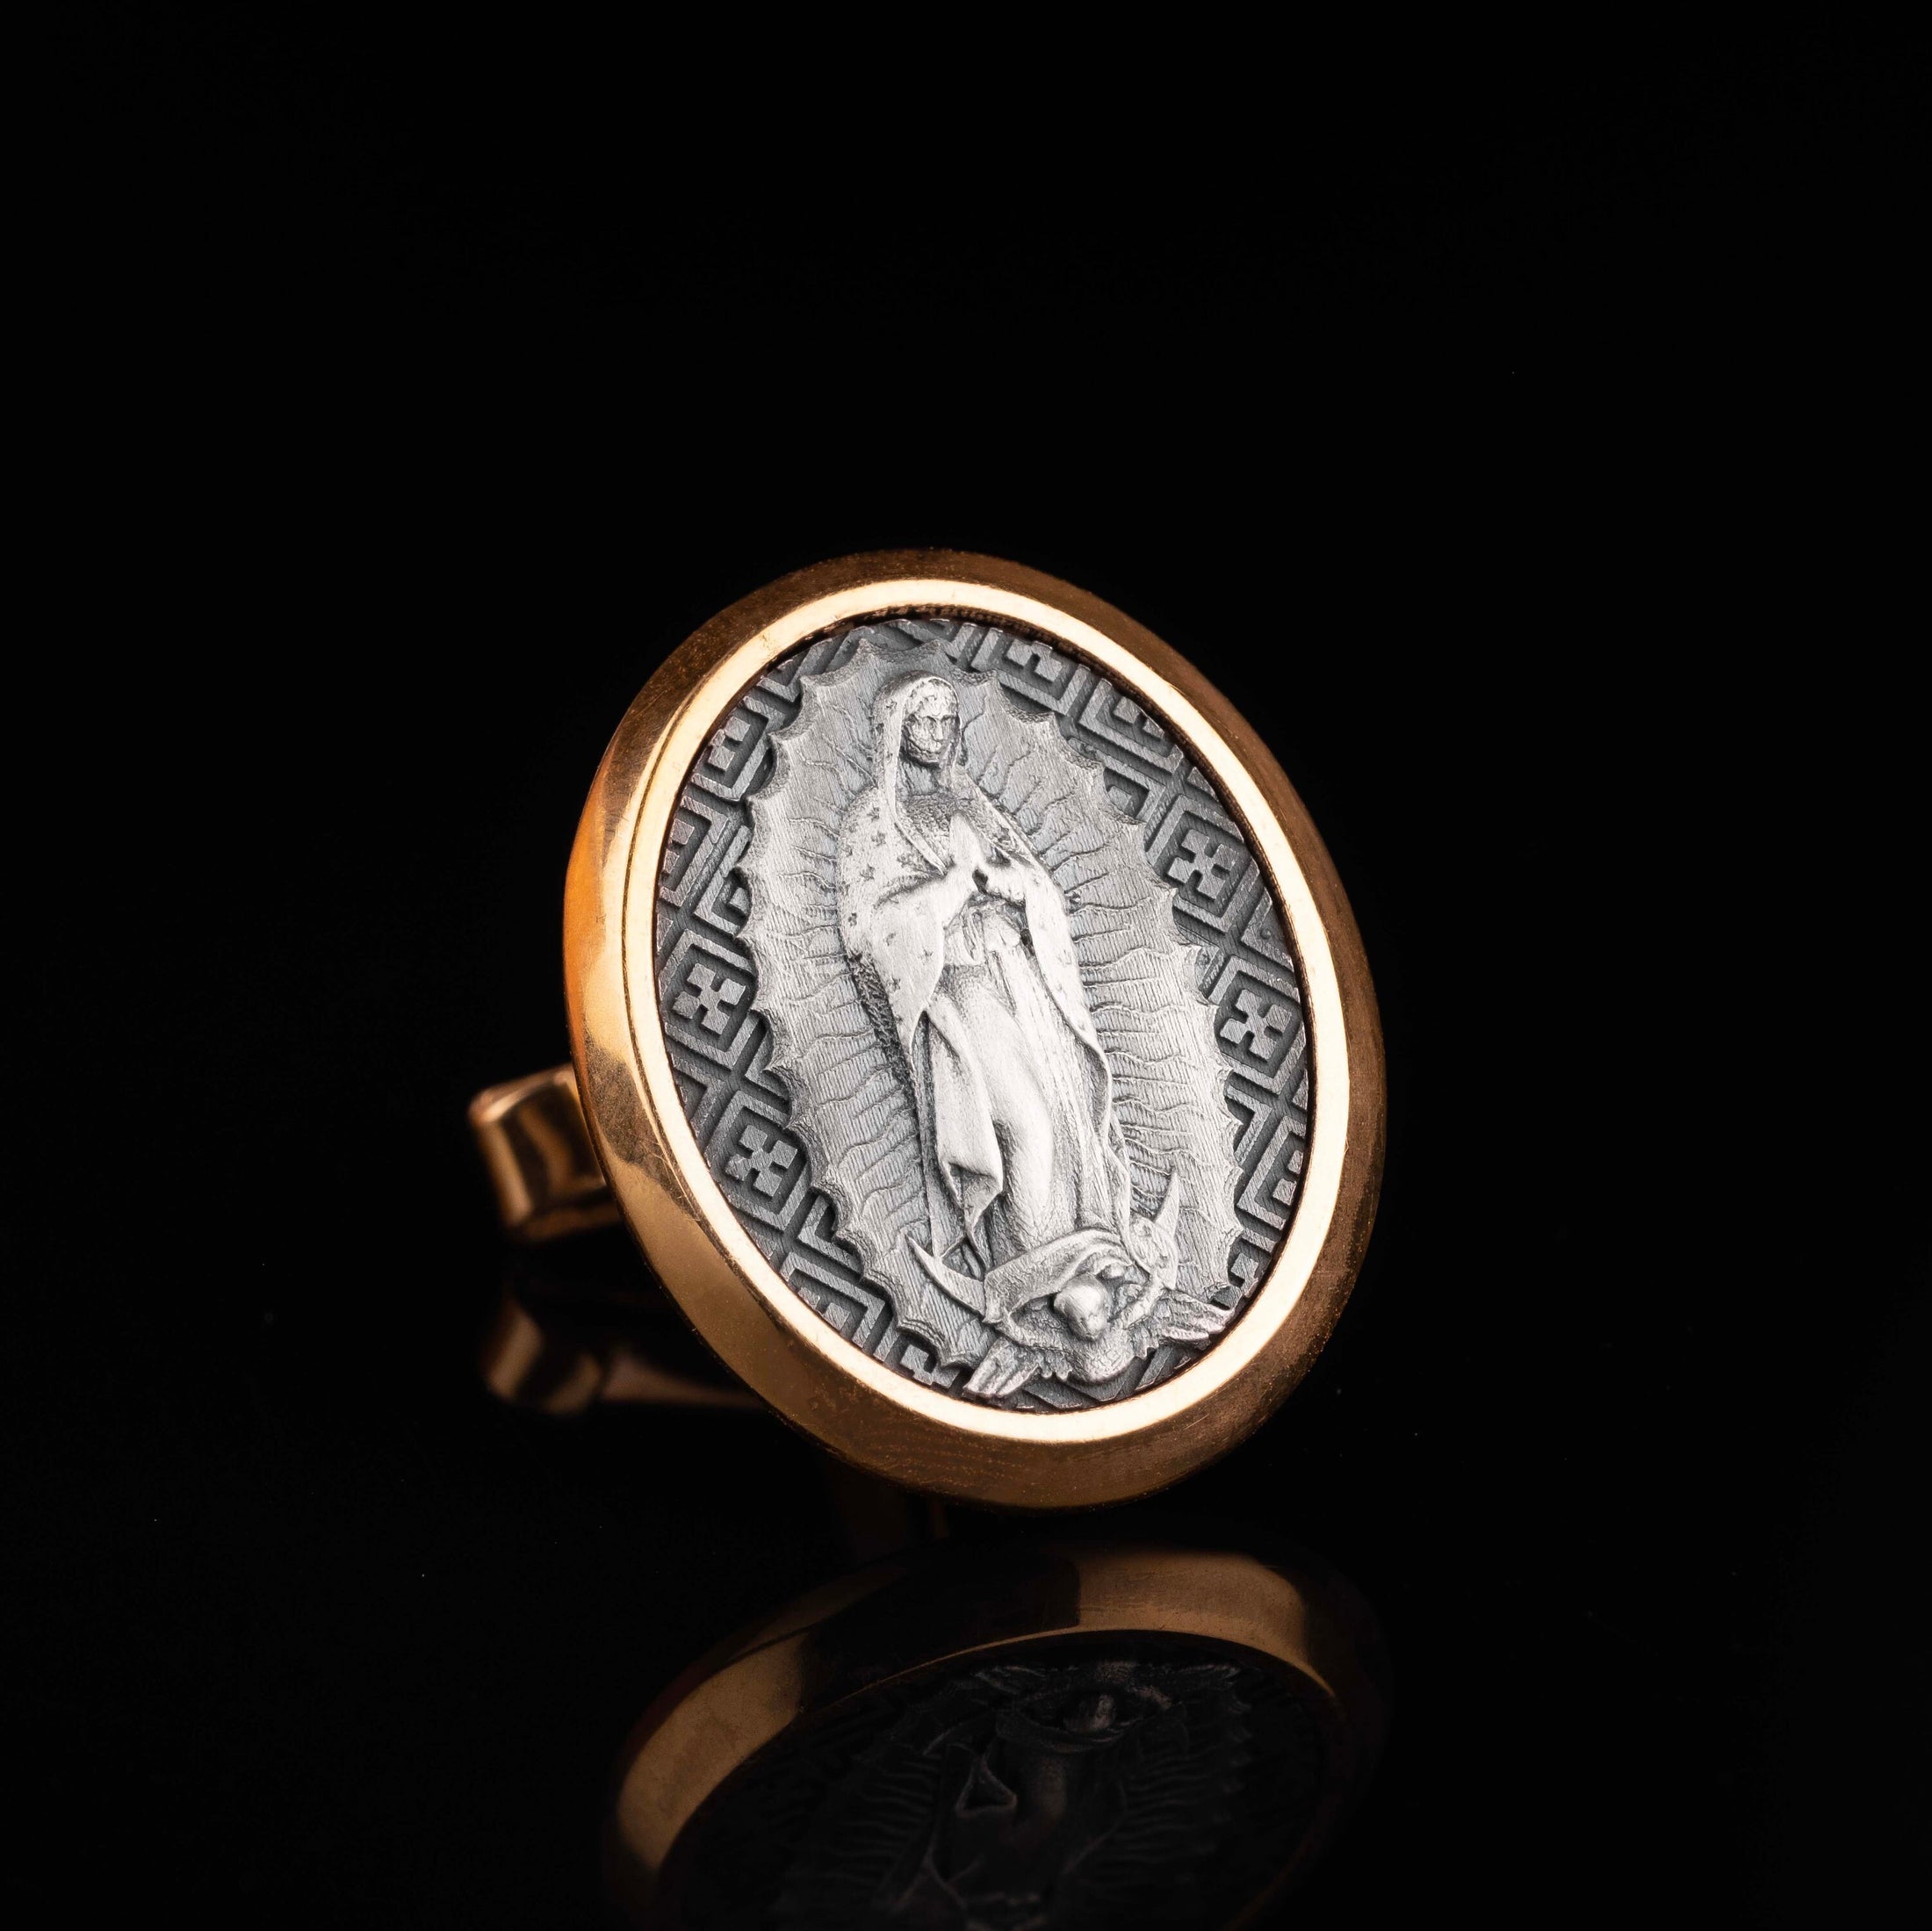 Lady Of Guadalupe Cufflinks, Virgen De Guadalupe, Virgin Mary, Memorial Gift, Catholic Cufflinks, Groomsman Gift, Religious Gift Gold Frame